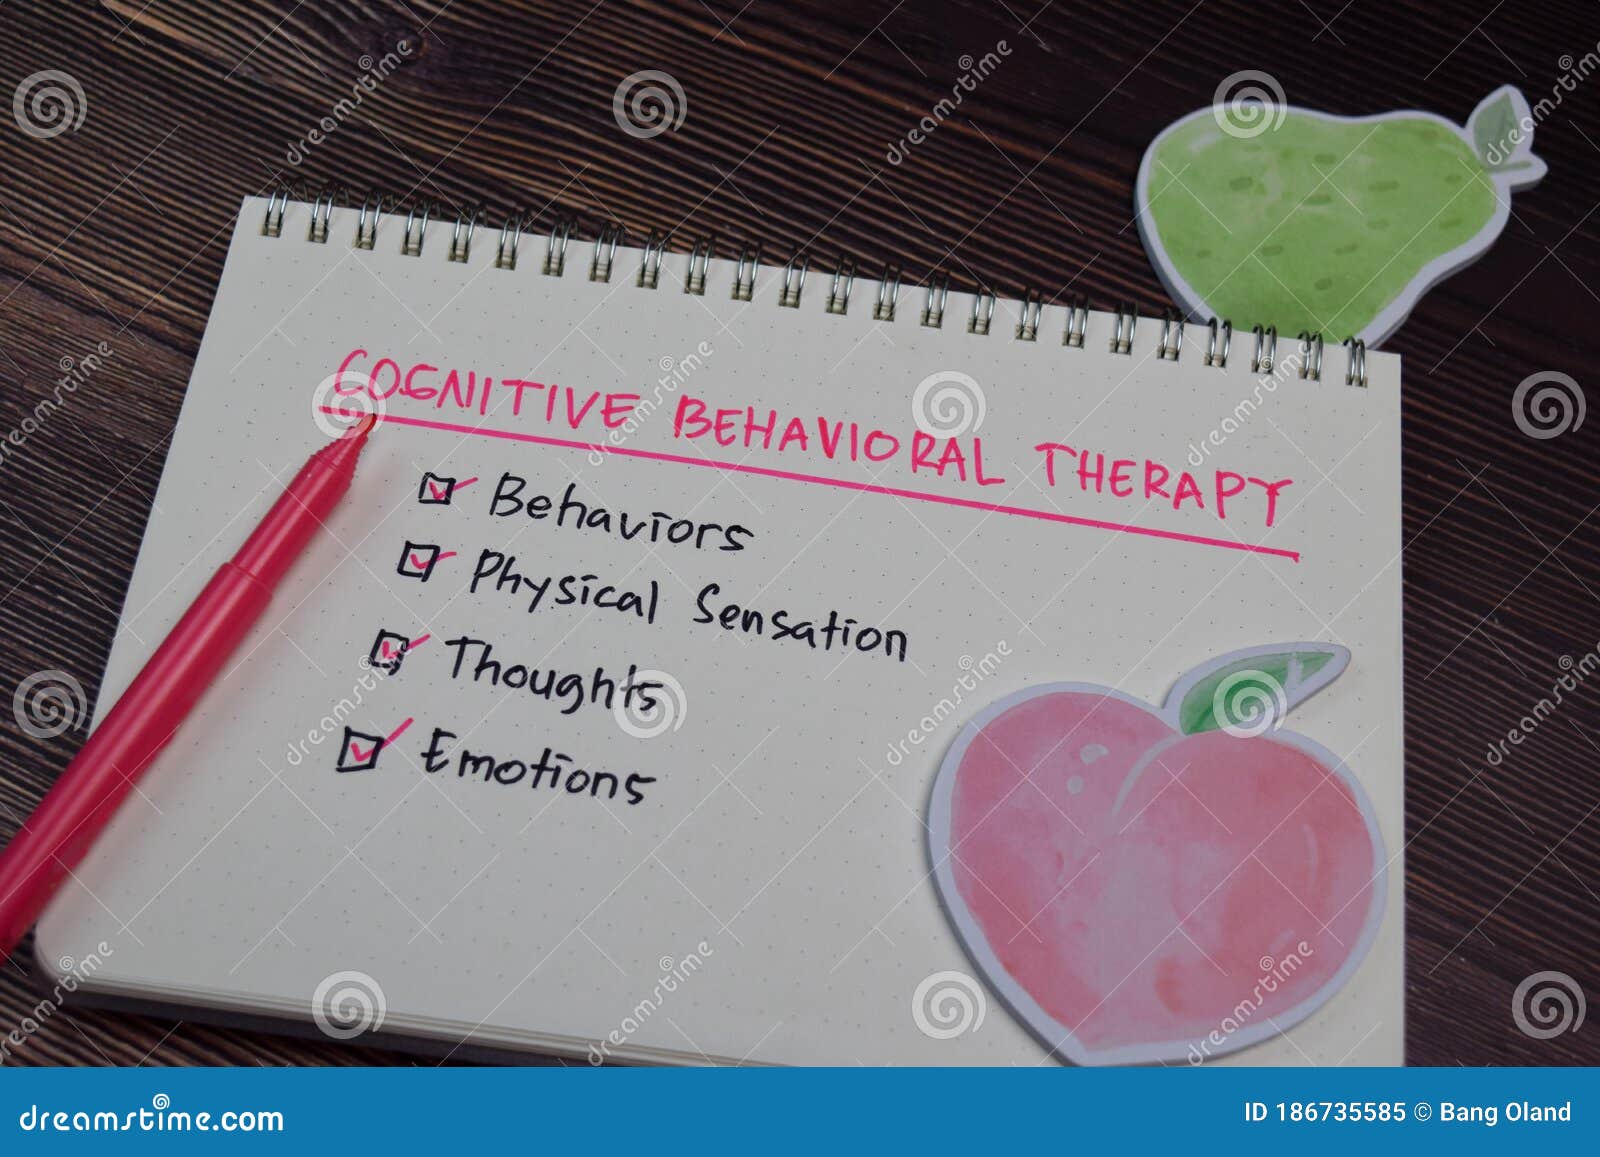 cognitive behavioral therapy write on a book with keywords  wooden table